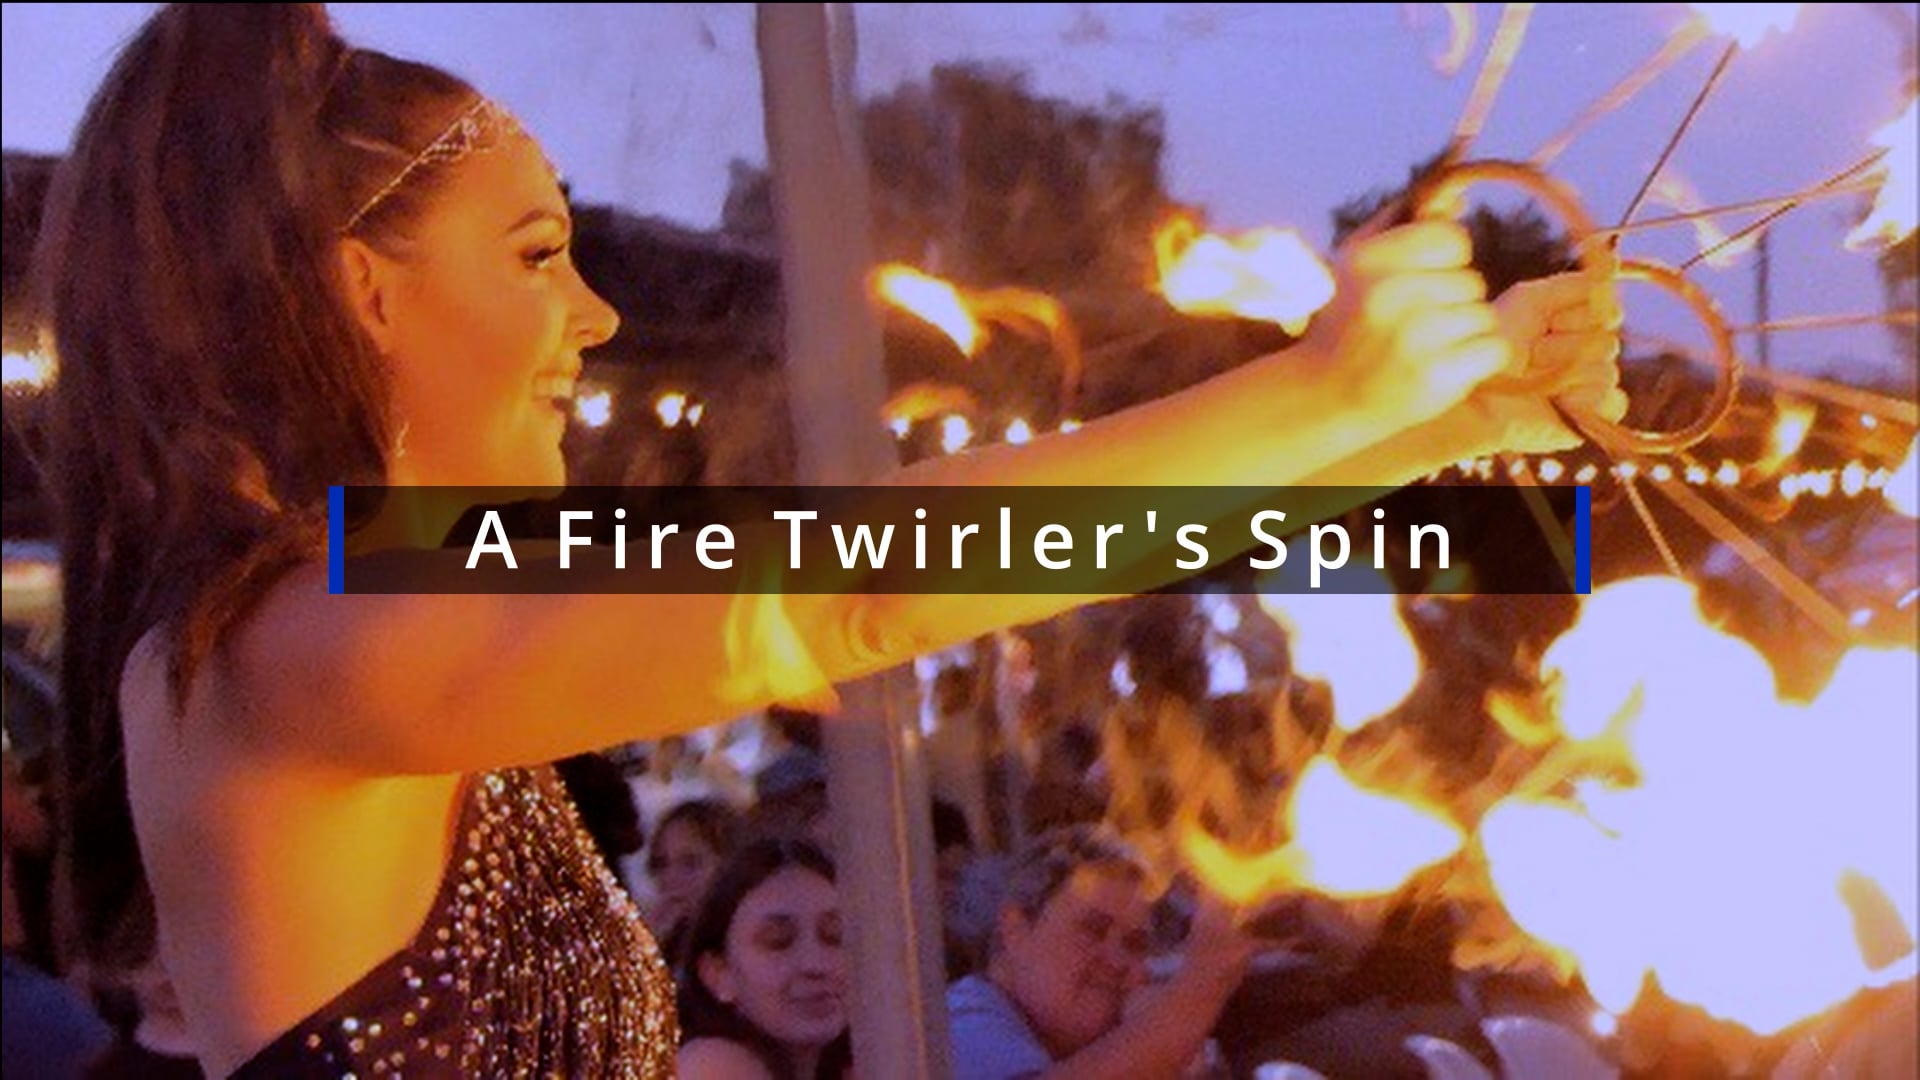 The Fire Twirler's Spin